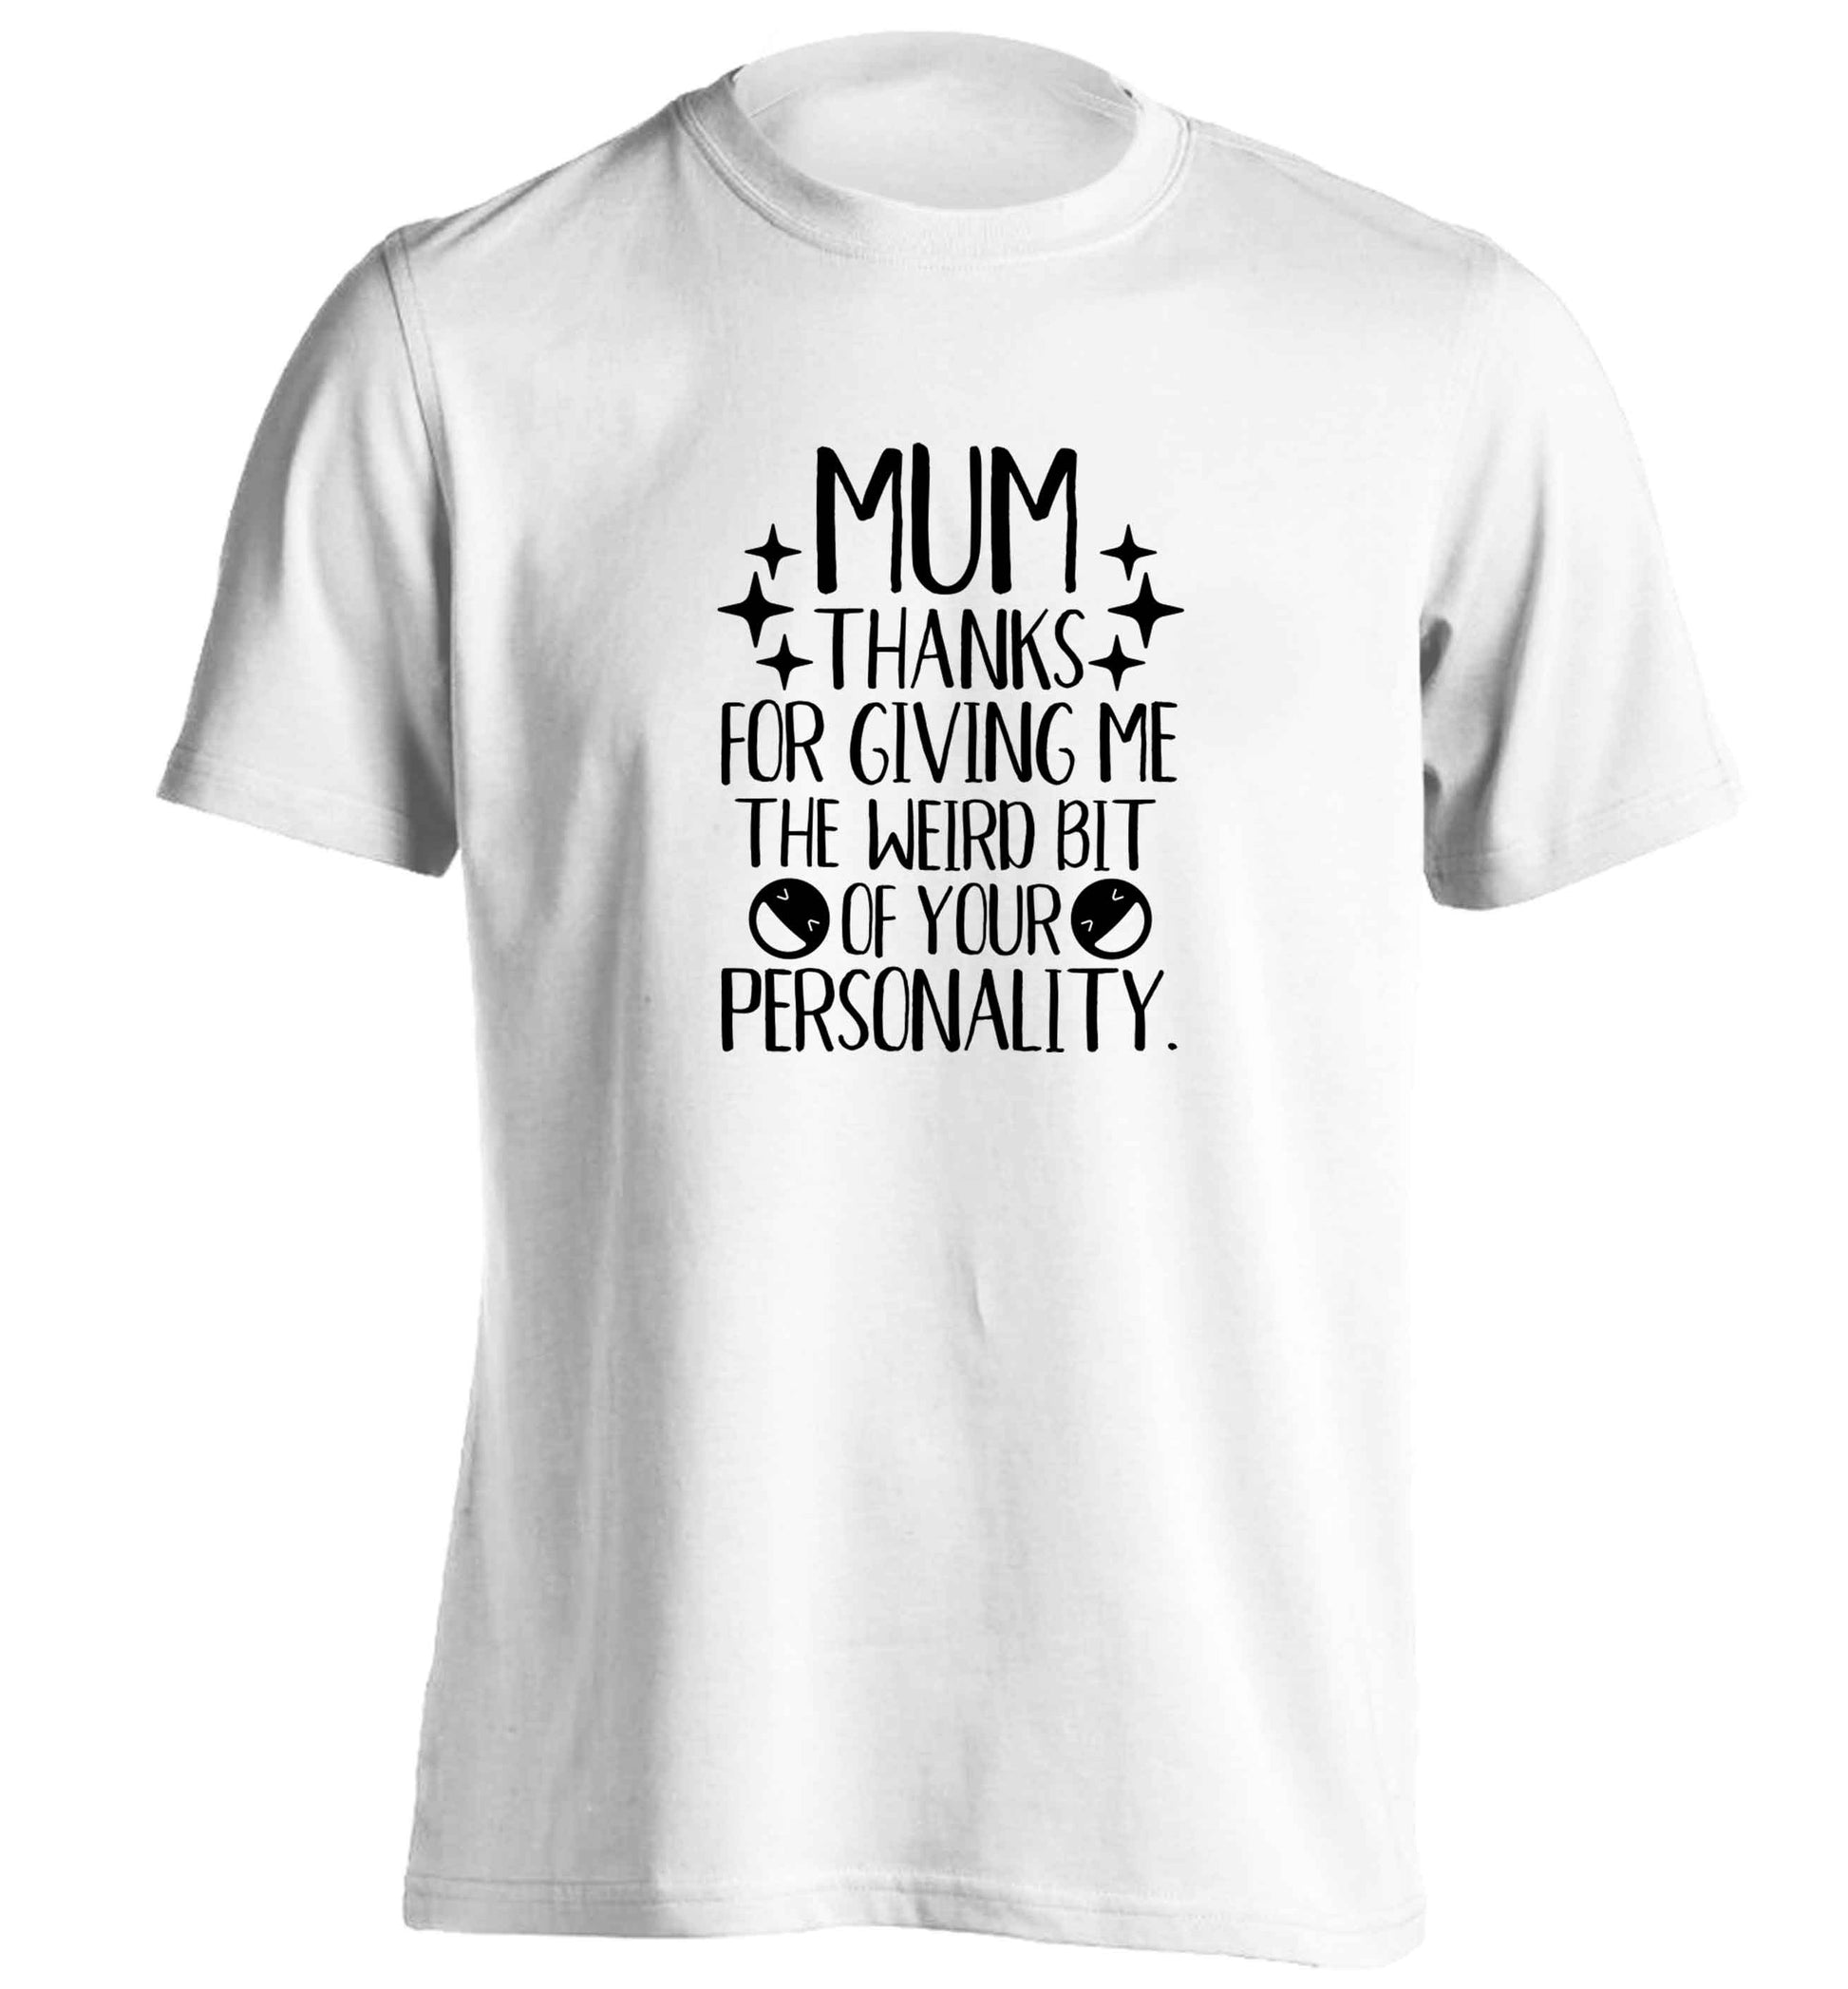 Mum thanks for giving me the weird bit of your personality adults unisex white Tshirt 2XL